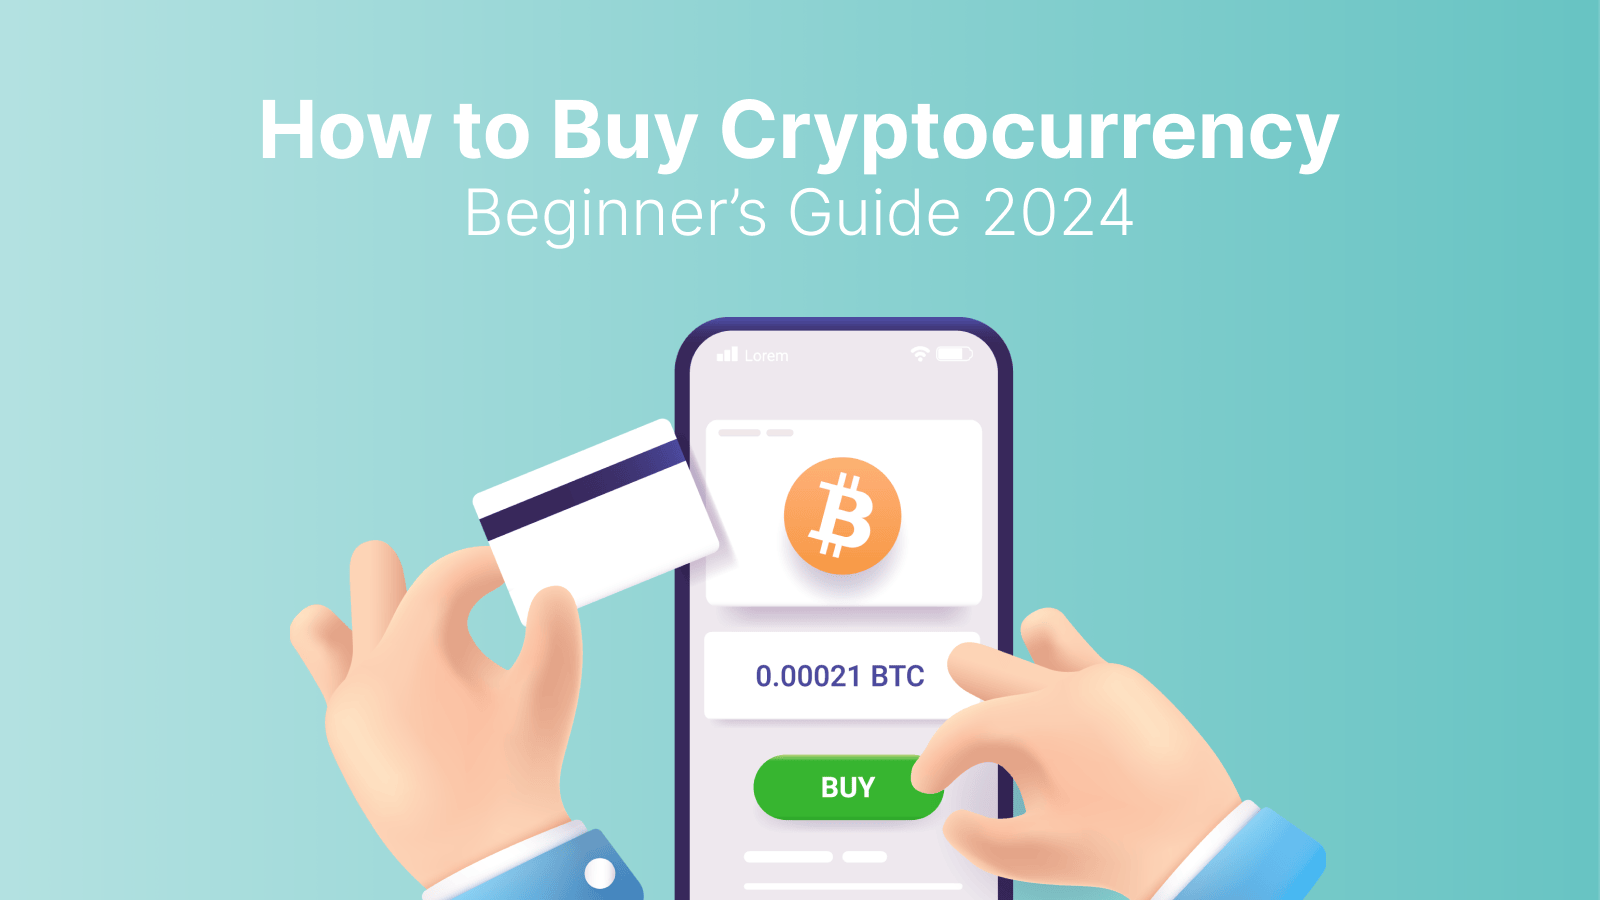 Where to Buy Cryptocurrency in the USA